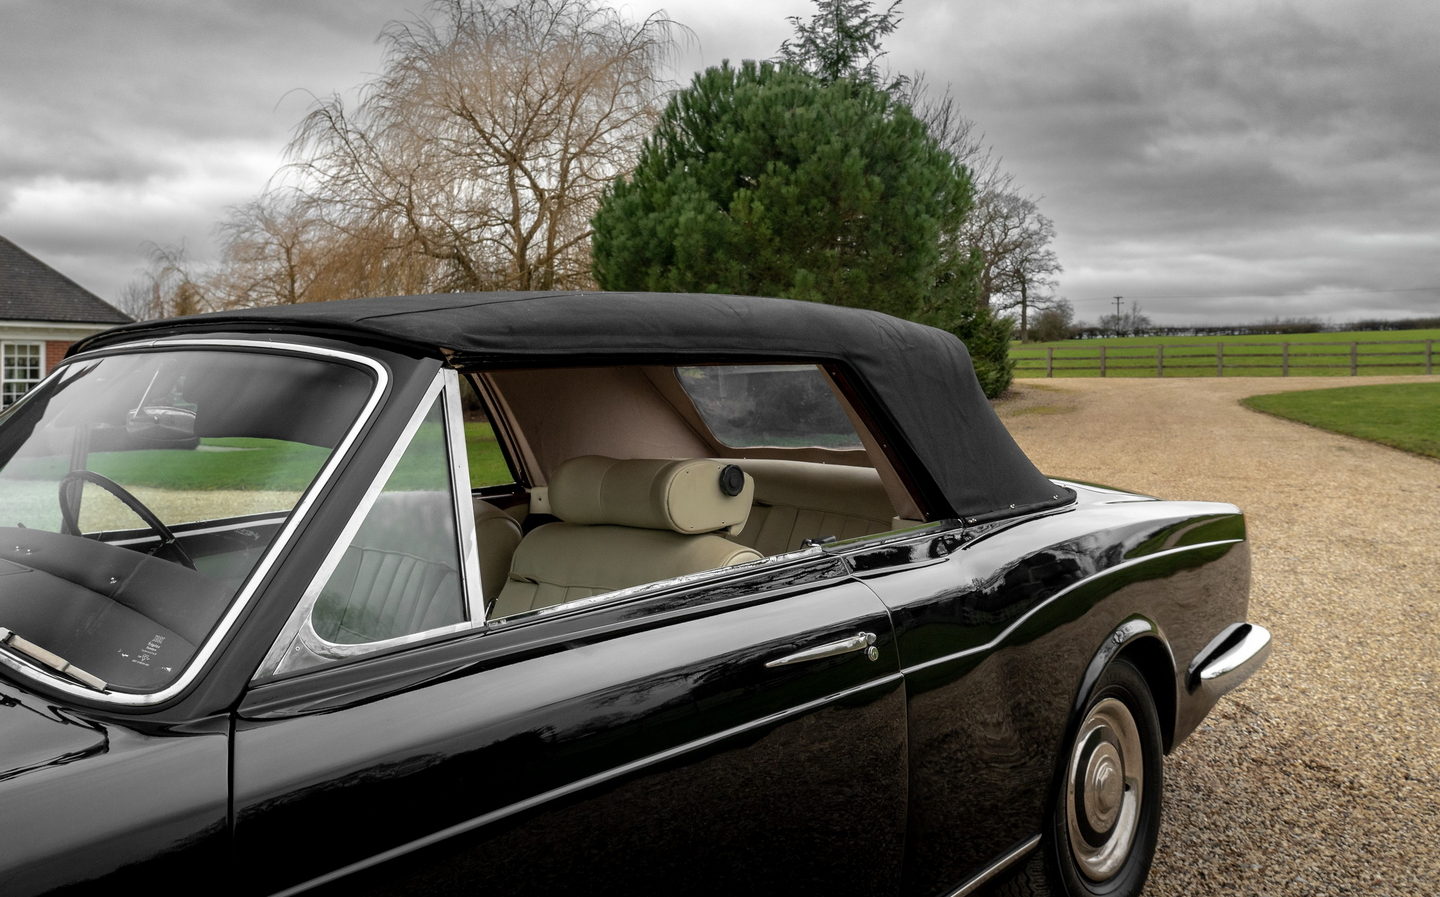 Sir Michael Caine’s first car, a 1968 Rolls-Royce Silver Shadow, heads to auction